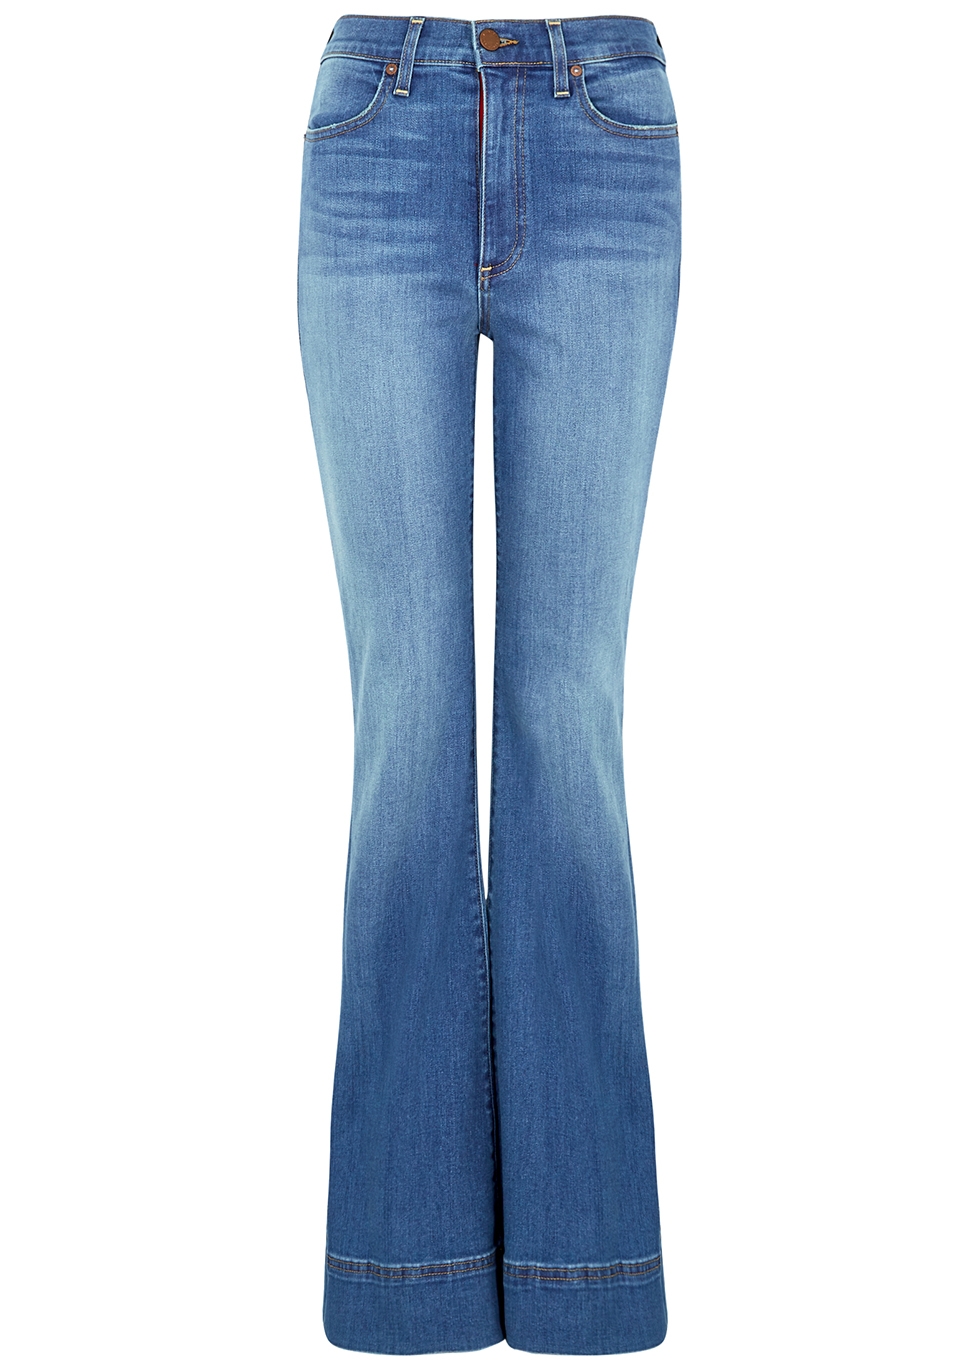 flared jeans womens uk